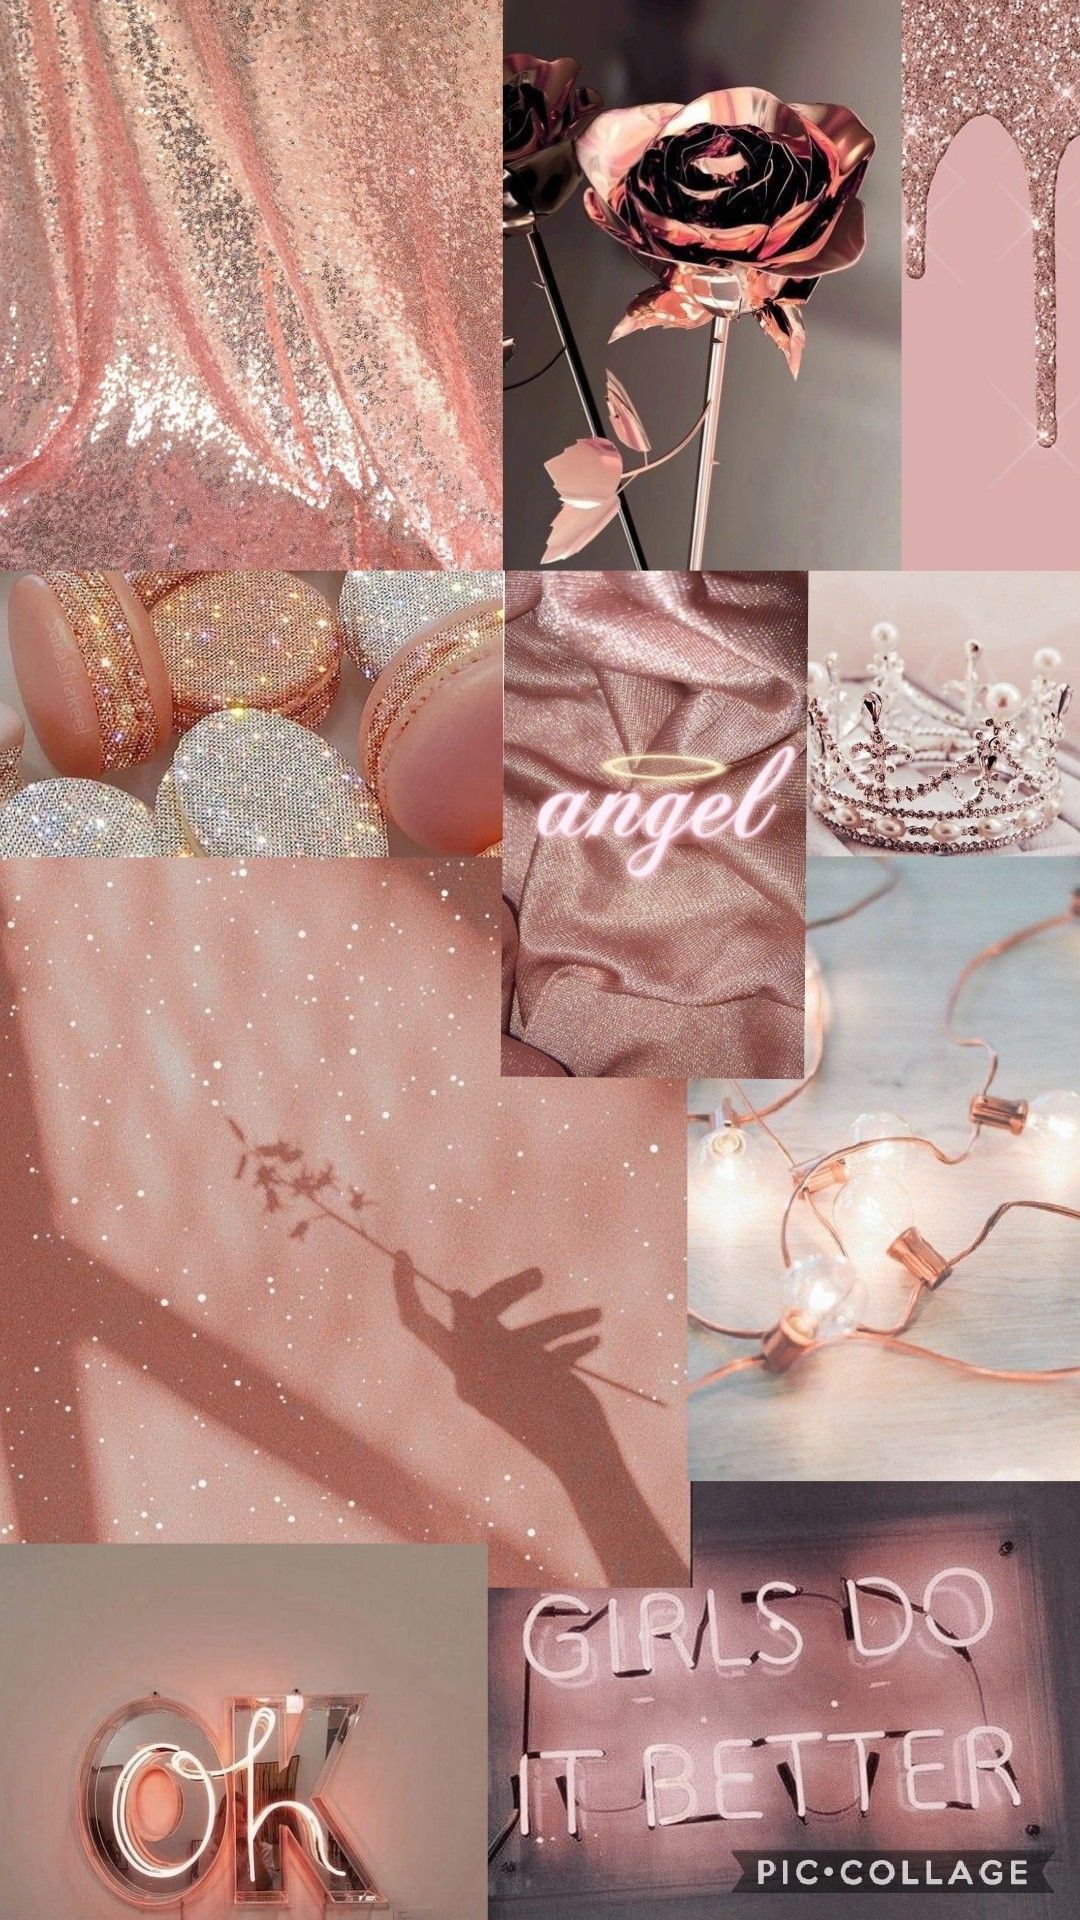 Rose gold aesthetic wallpaper background collage for phone and desktop. - Rose gold